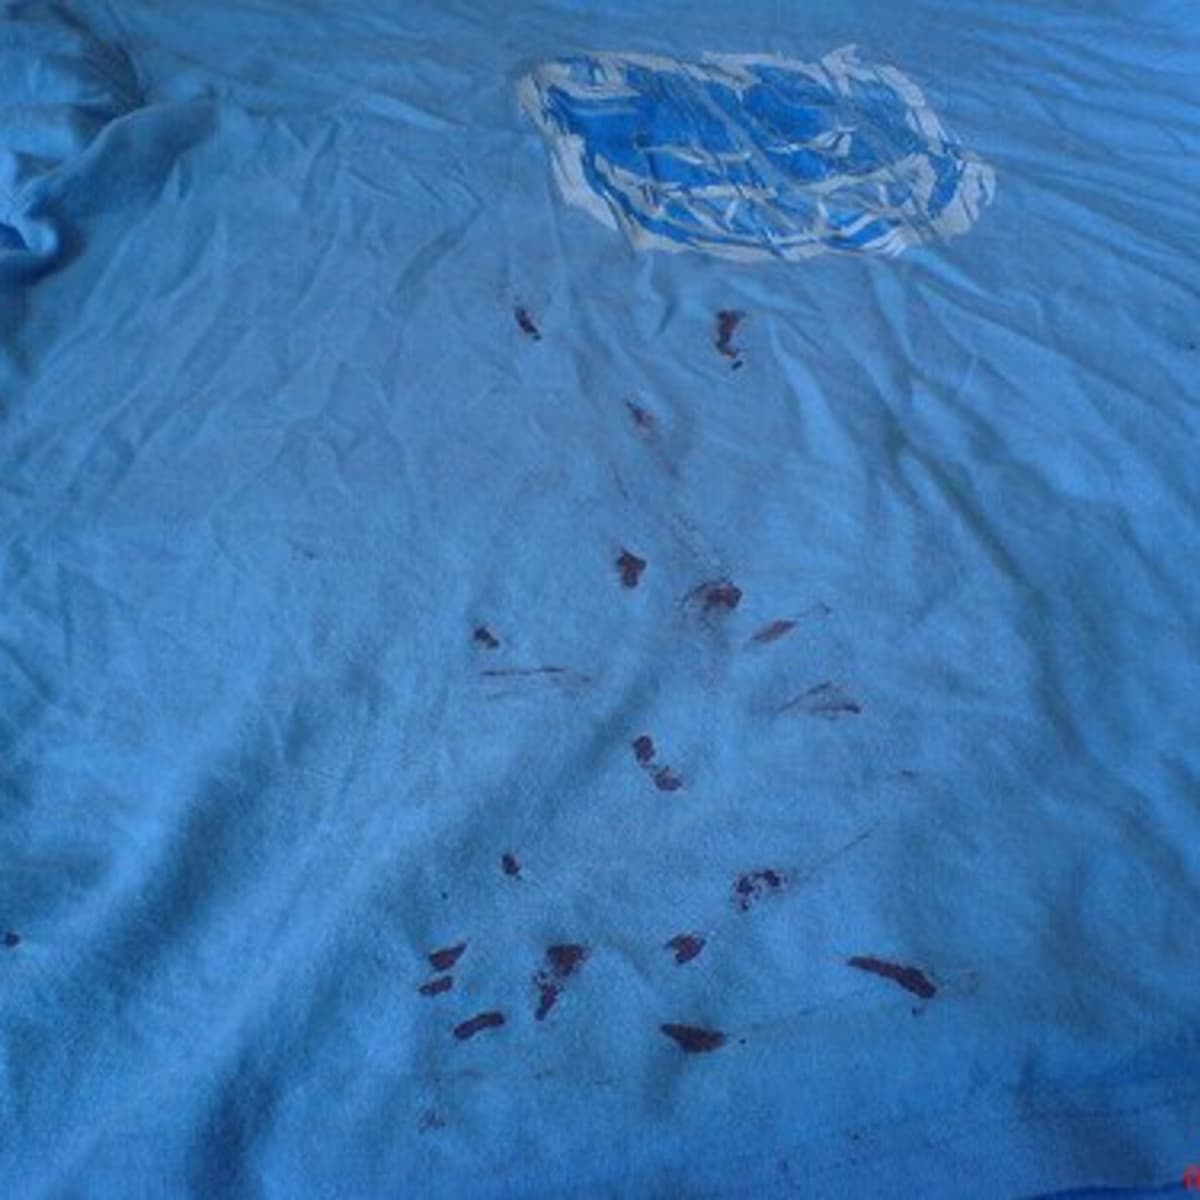 How To Clean Dry Blood Stains From Clothes